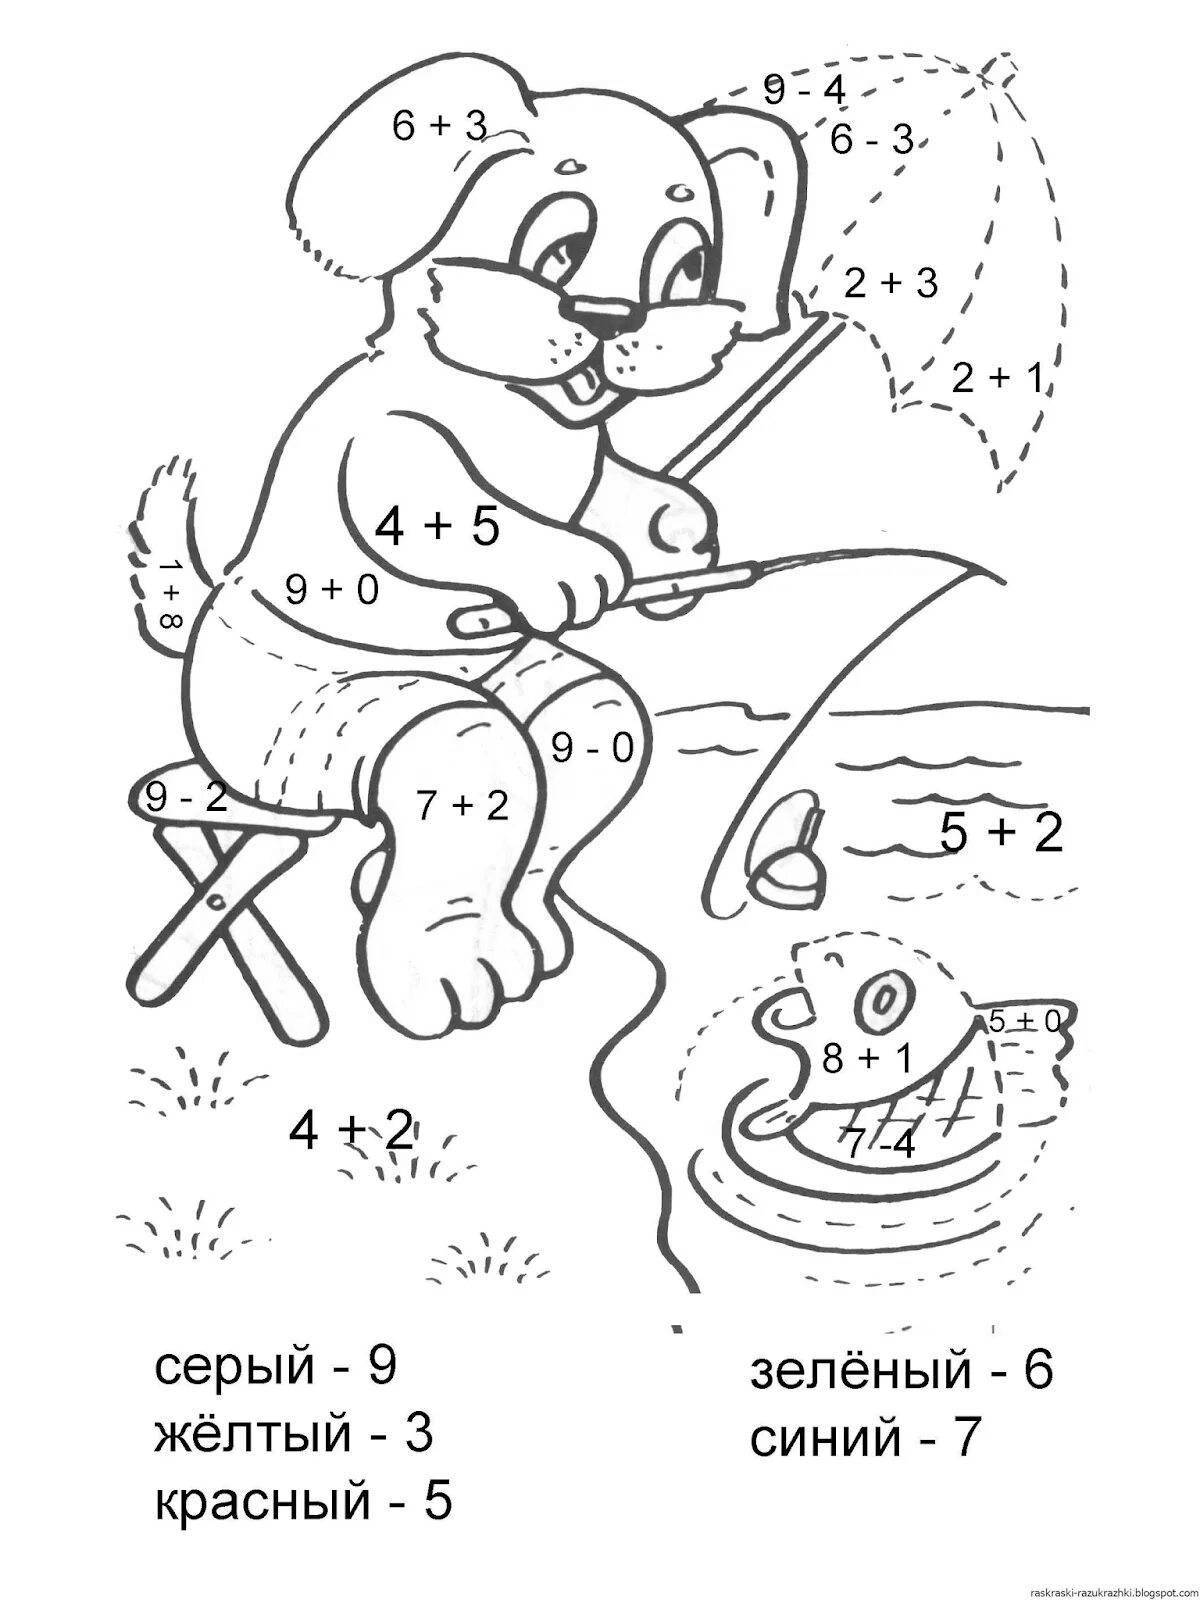 Fun coloring examples for babies